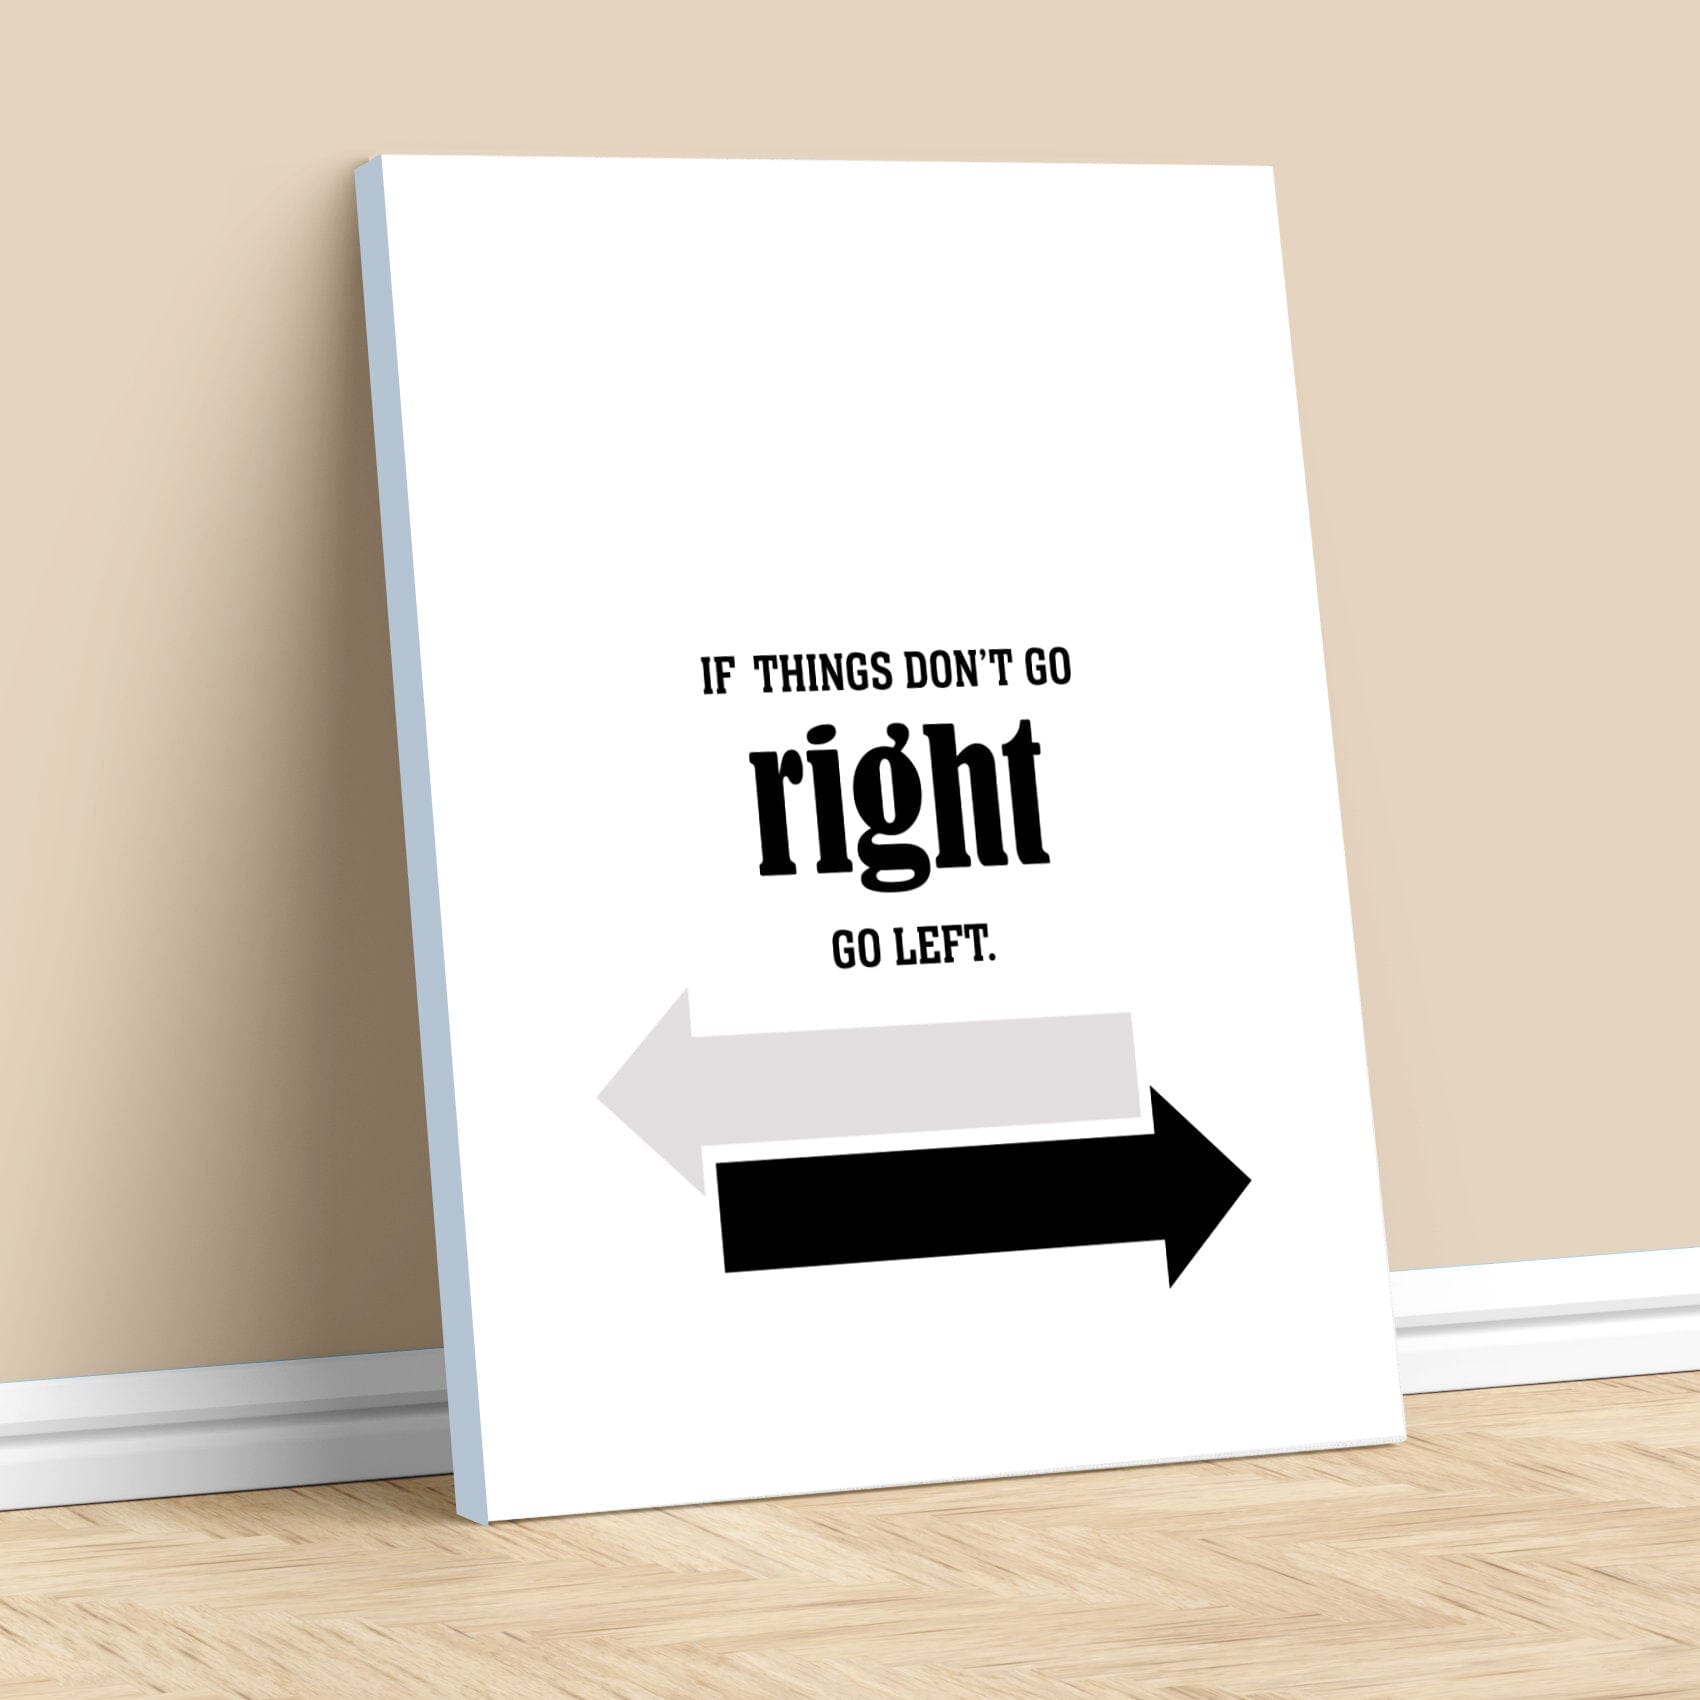 If Things Don't go Right, Go Left - Wise and Witty Word Art Wise and Wiseass Quotes Song Lyrics Art 11x14 Canvas Wrap 